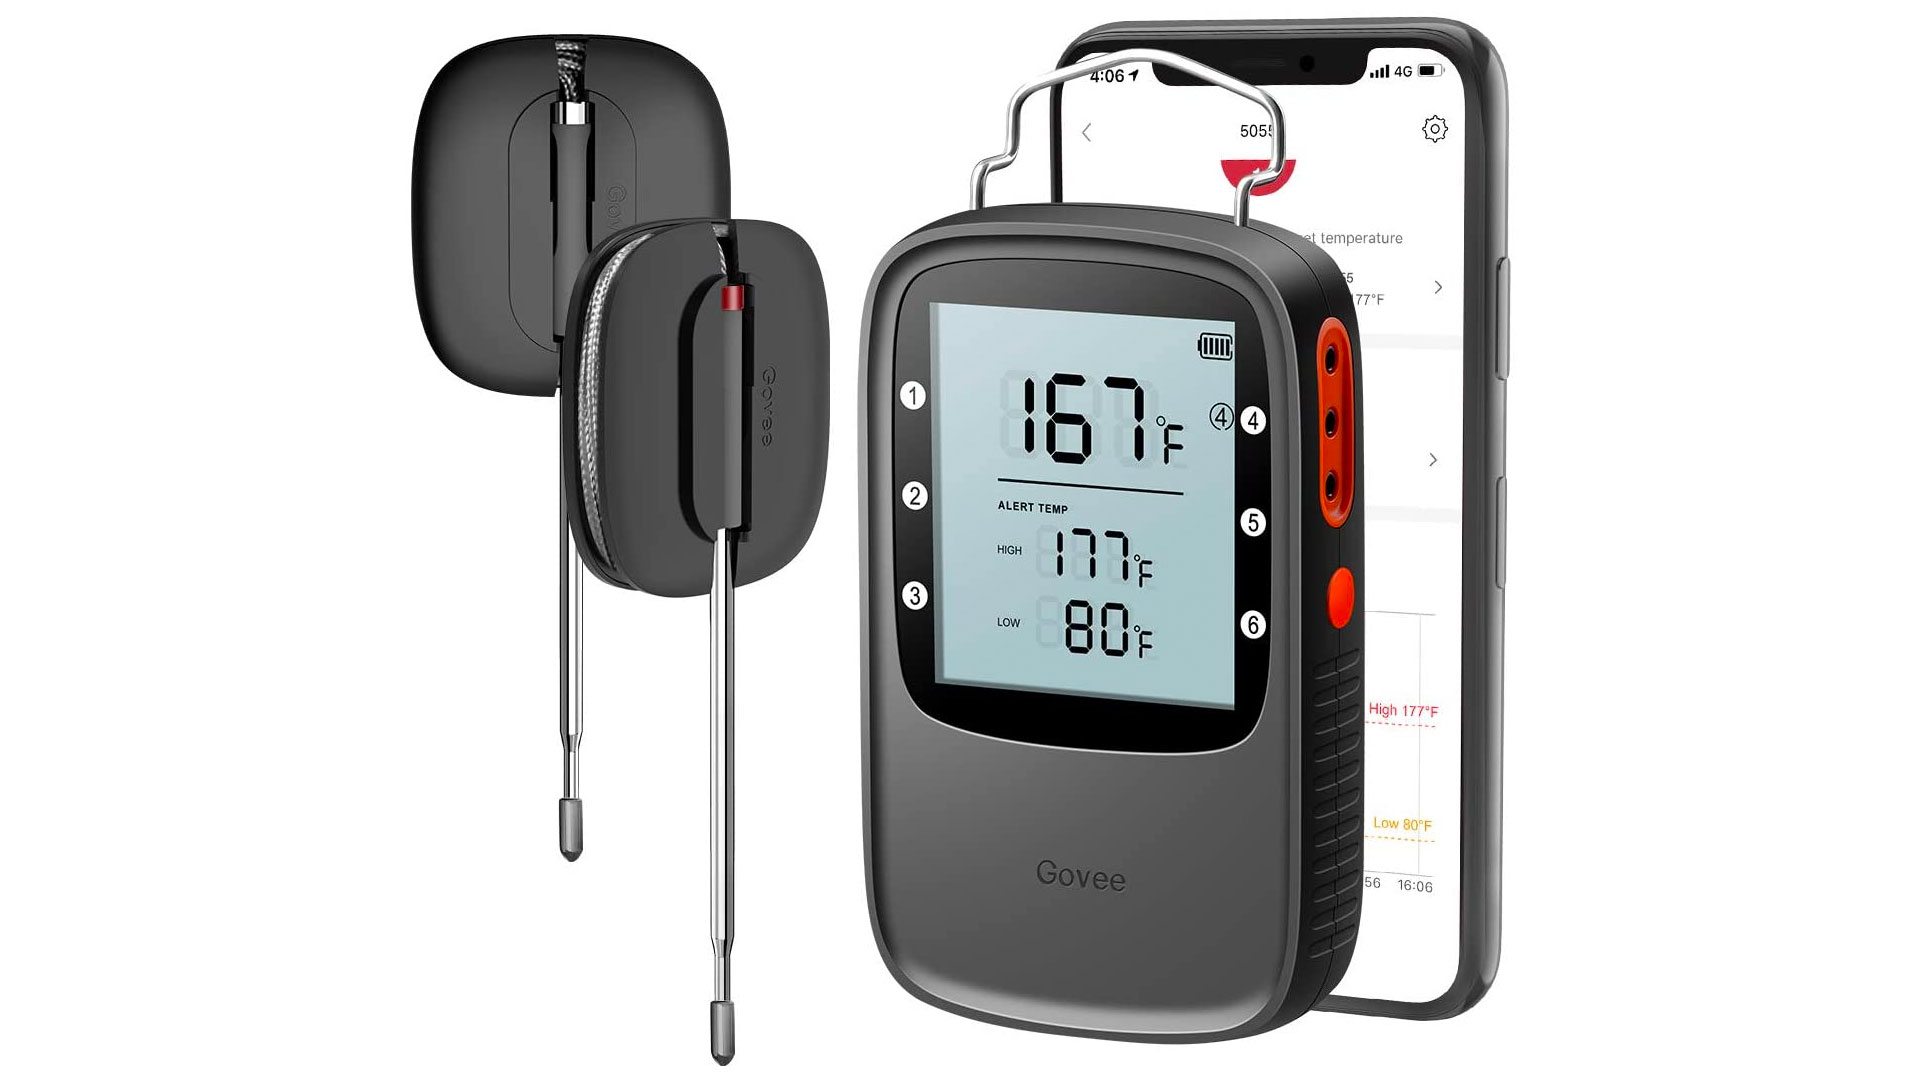 https://9to5toys.com/wp-content/uploads/sites/5/2020/08/govee-bluetooth-grill-thermometer.jpg